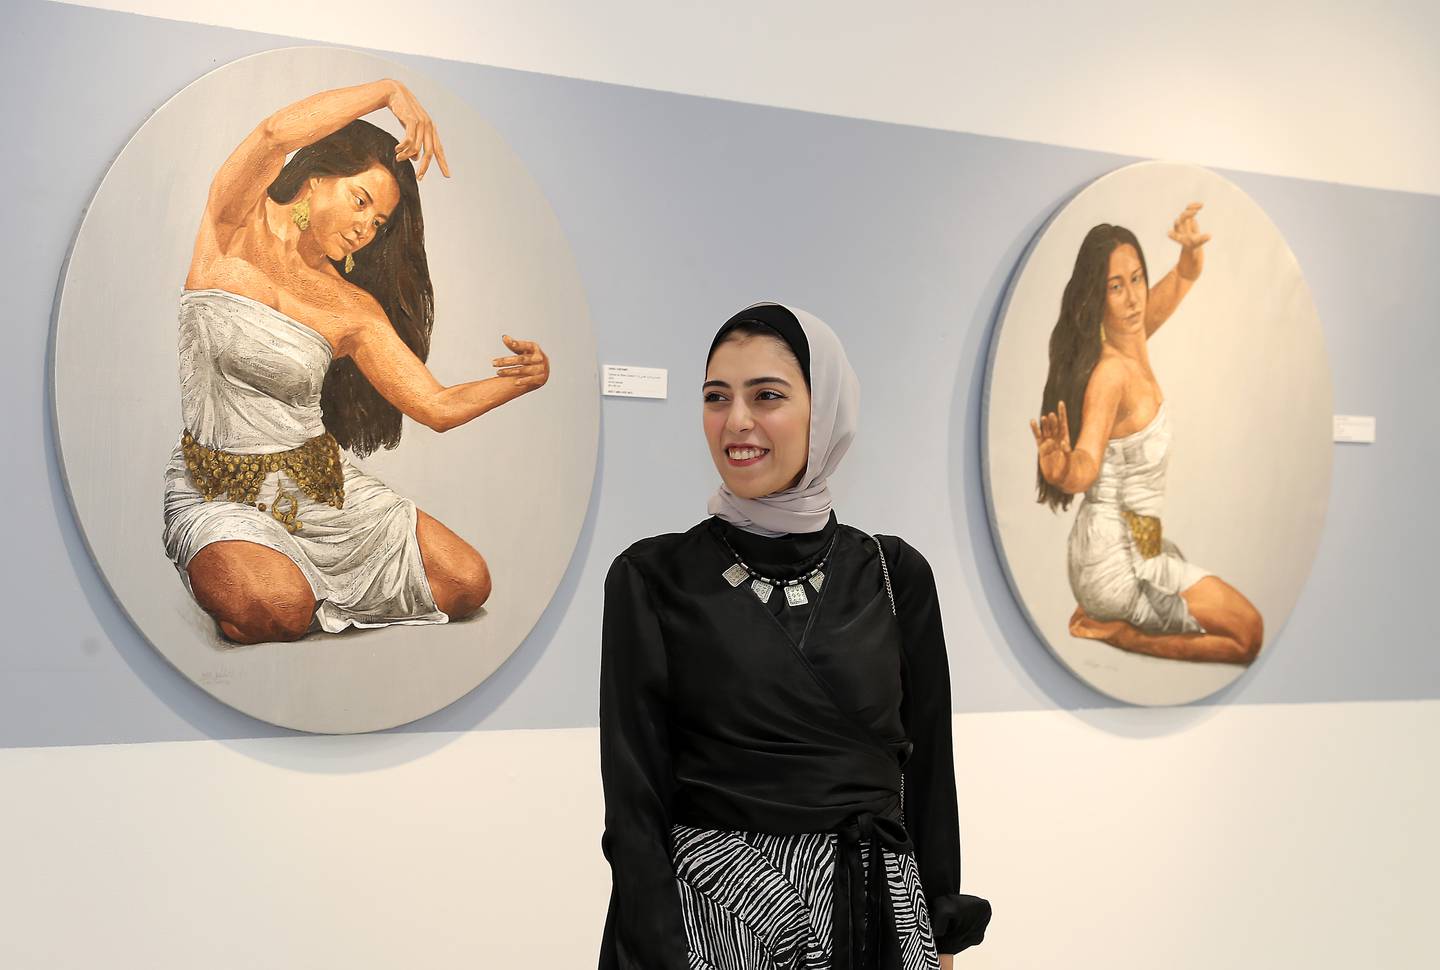 Egyptian artist Sara Tantawy transforms the art of dance in first UAE show